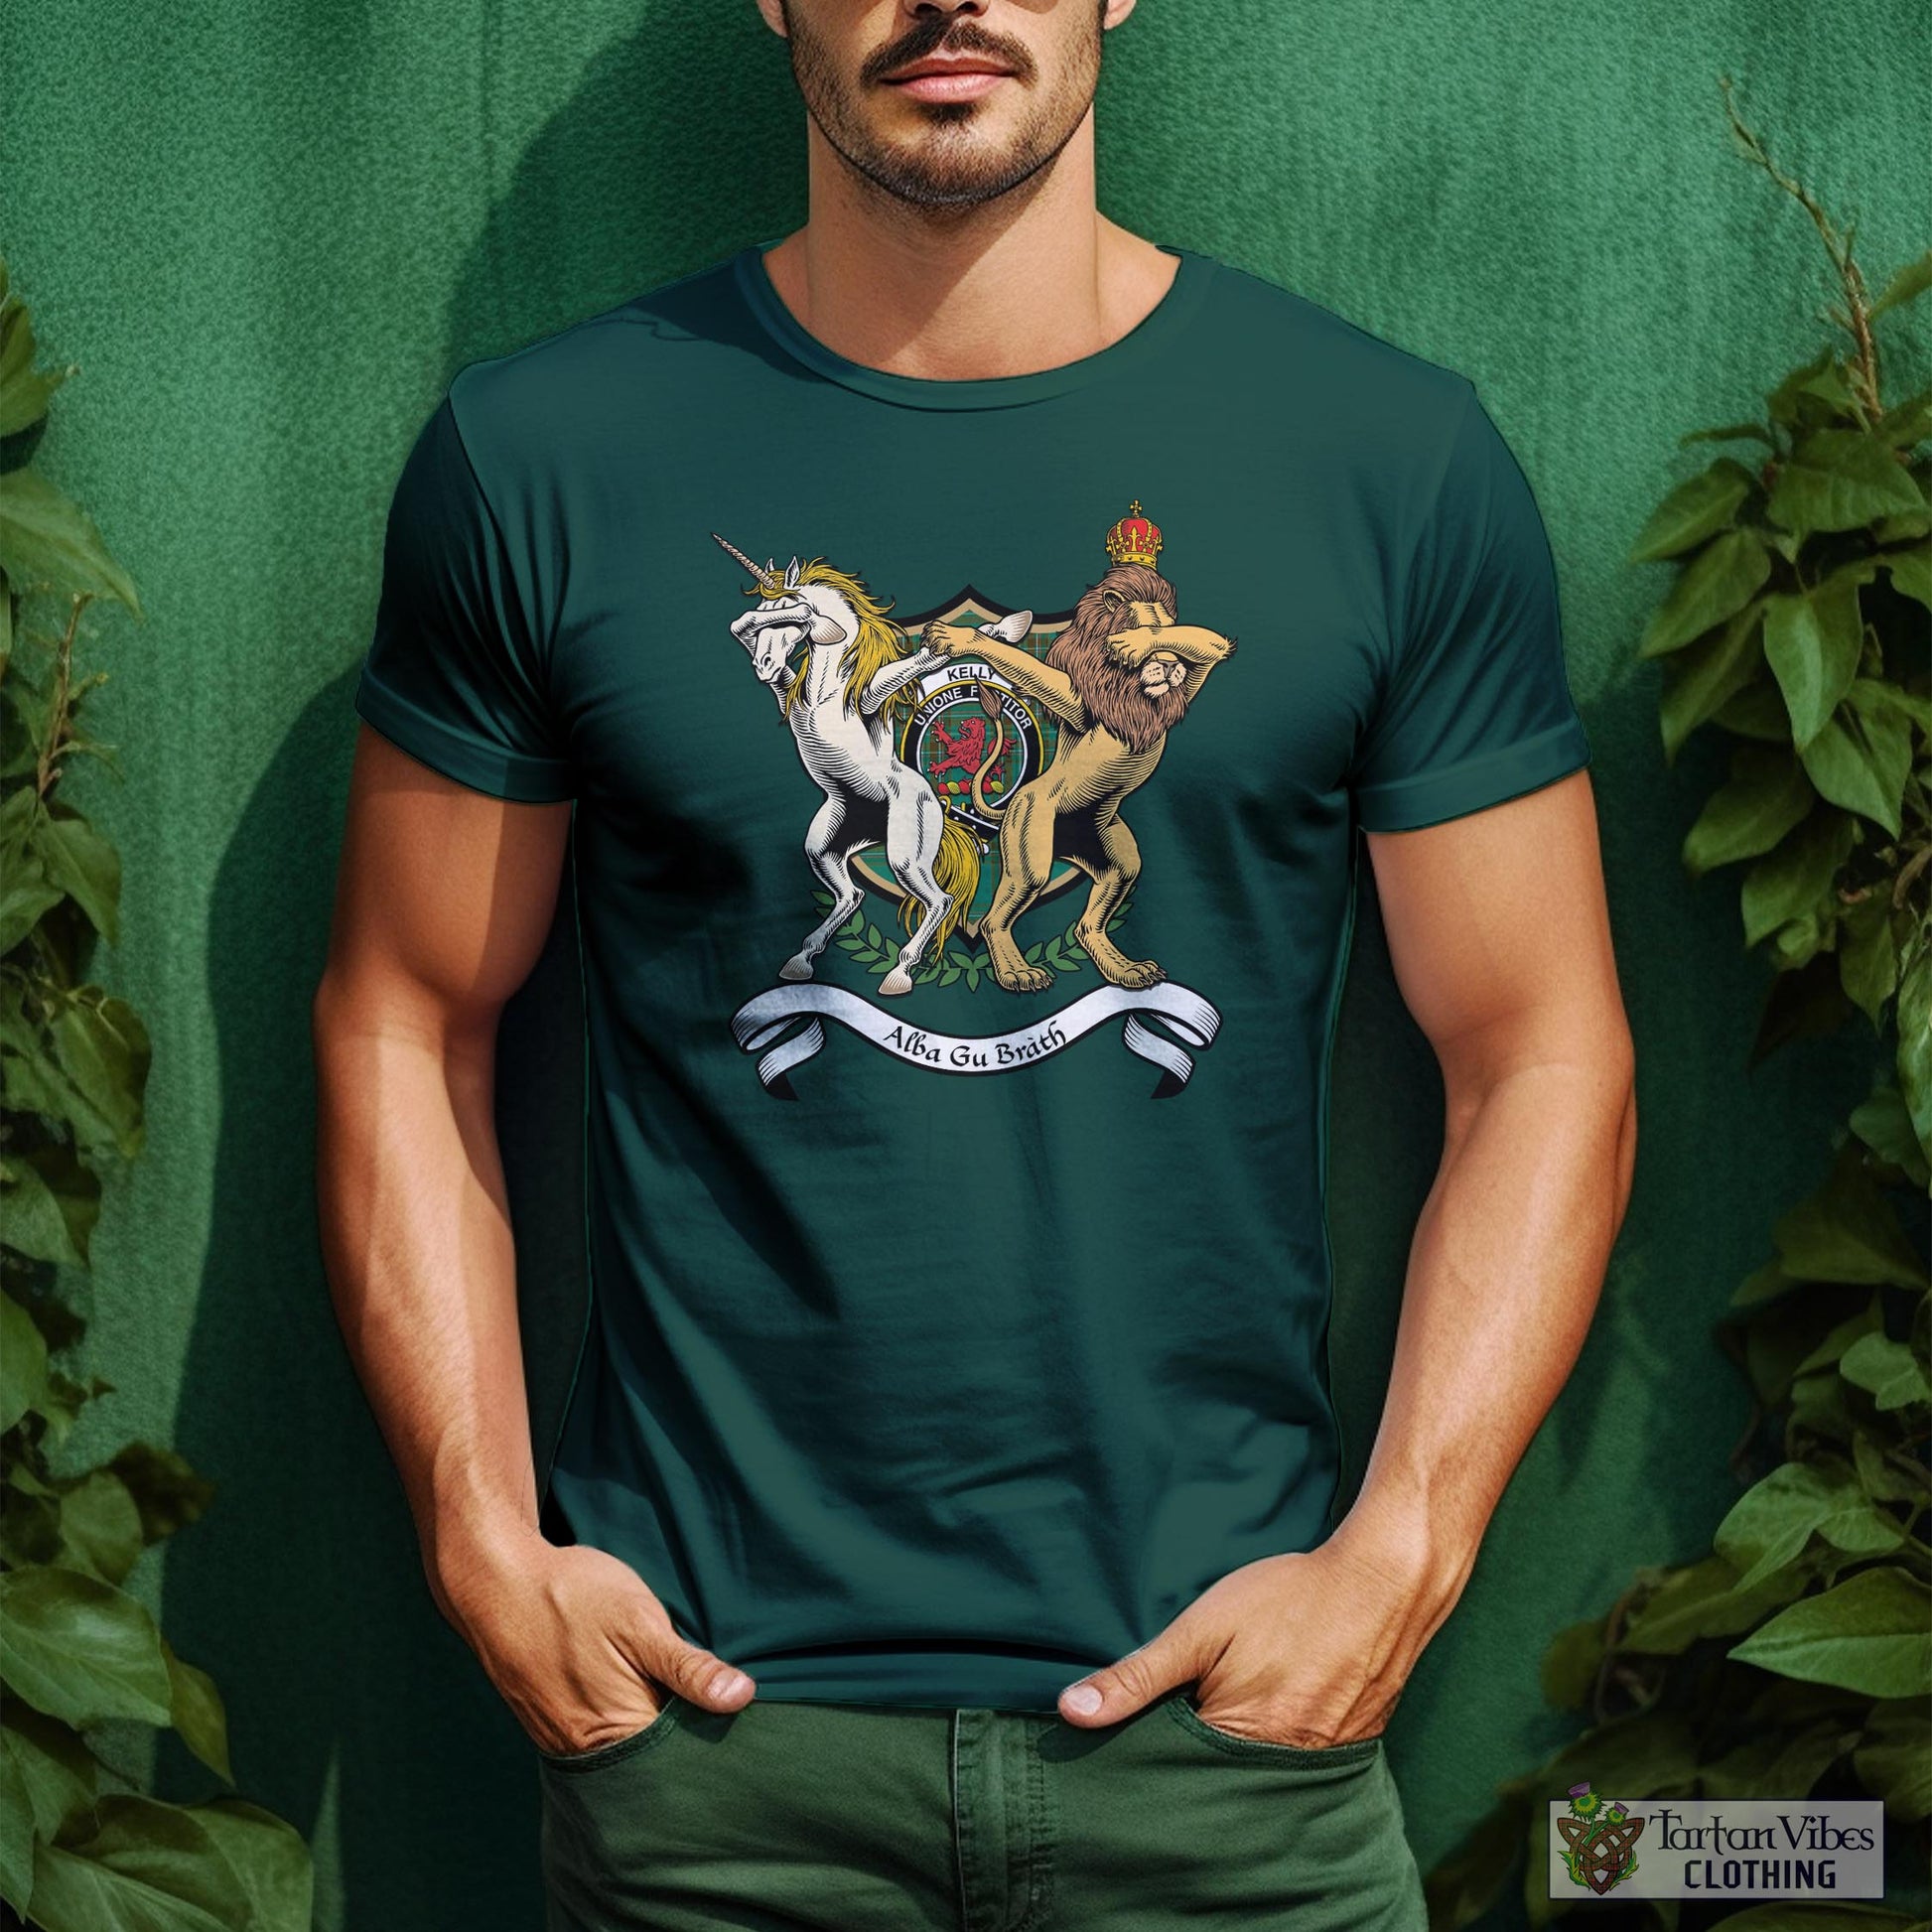 Tartan Vibes Clothing Kelly Dress Family Crest Cotton Men's T-Shirt with Scotland Royal Coat Of Arm Funny Style